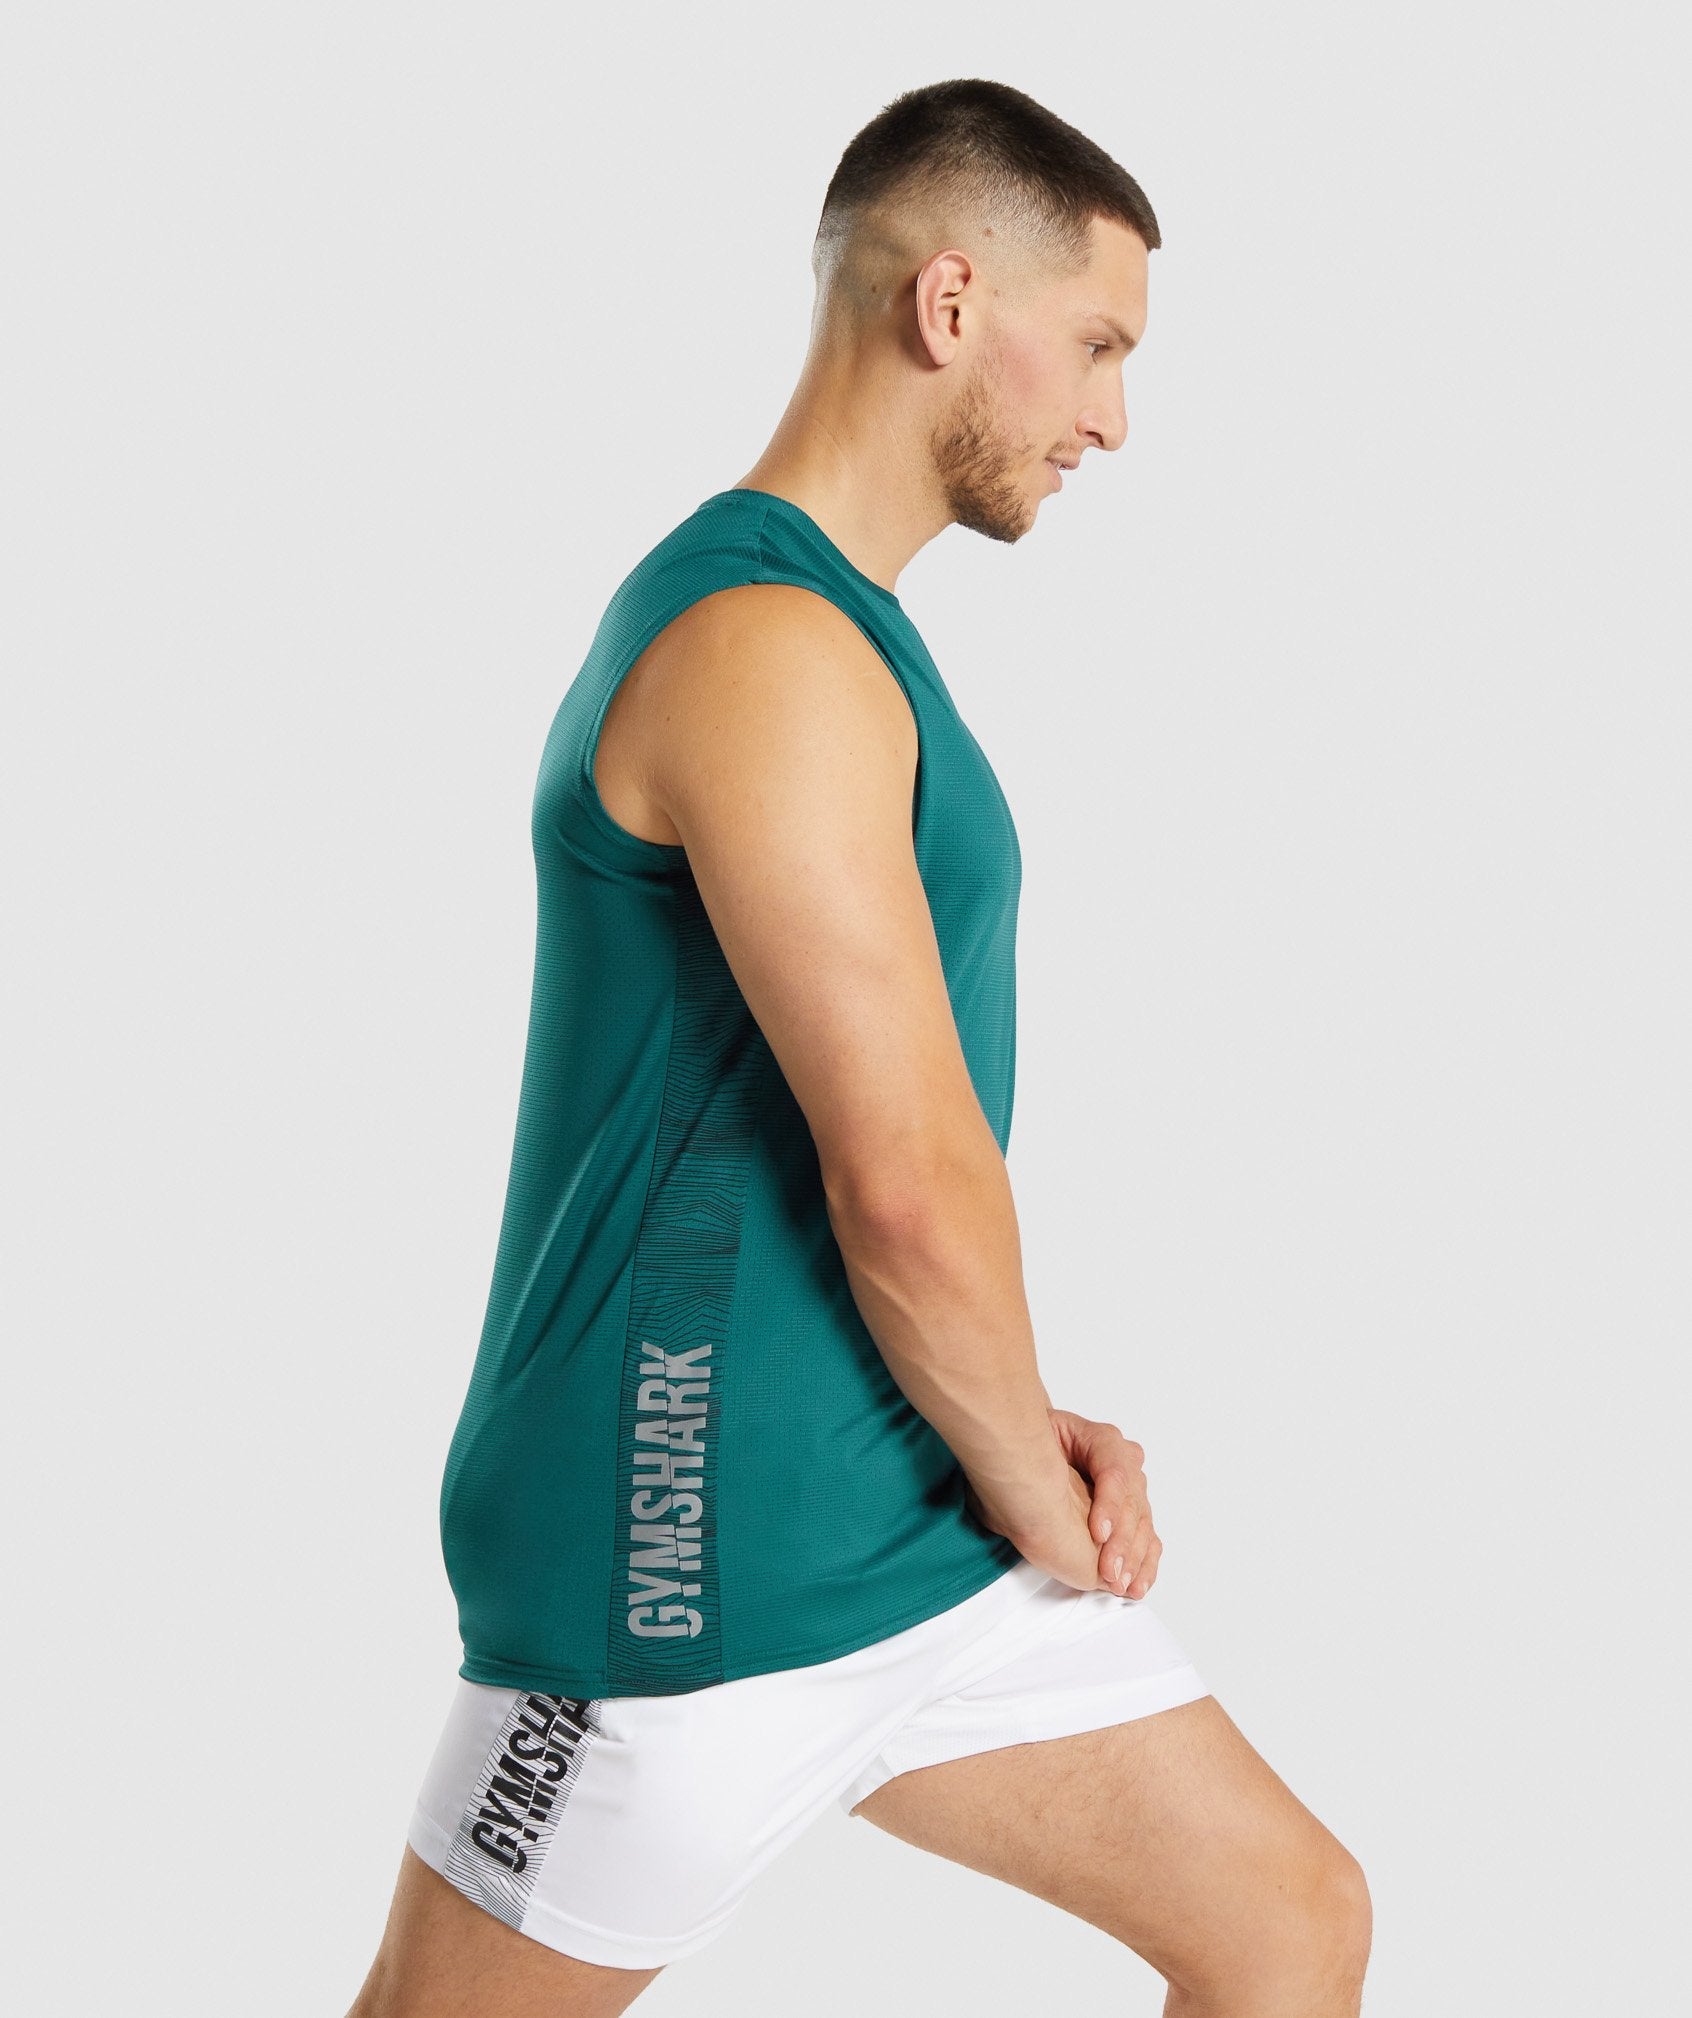 Sport Tank in Teal - view 3